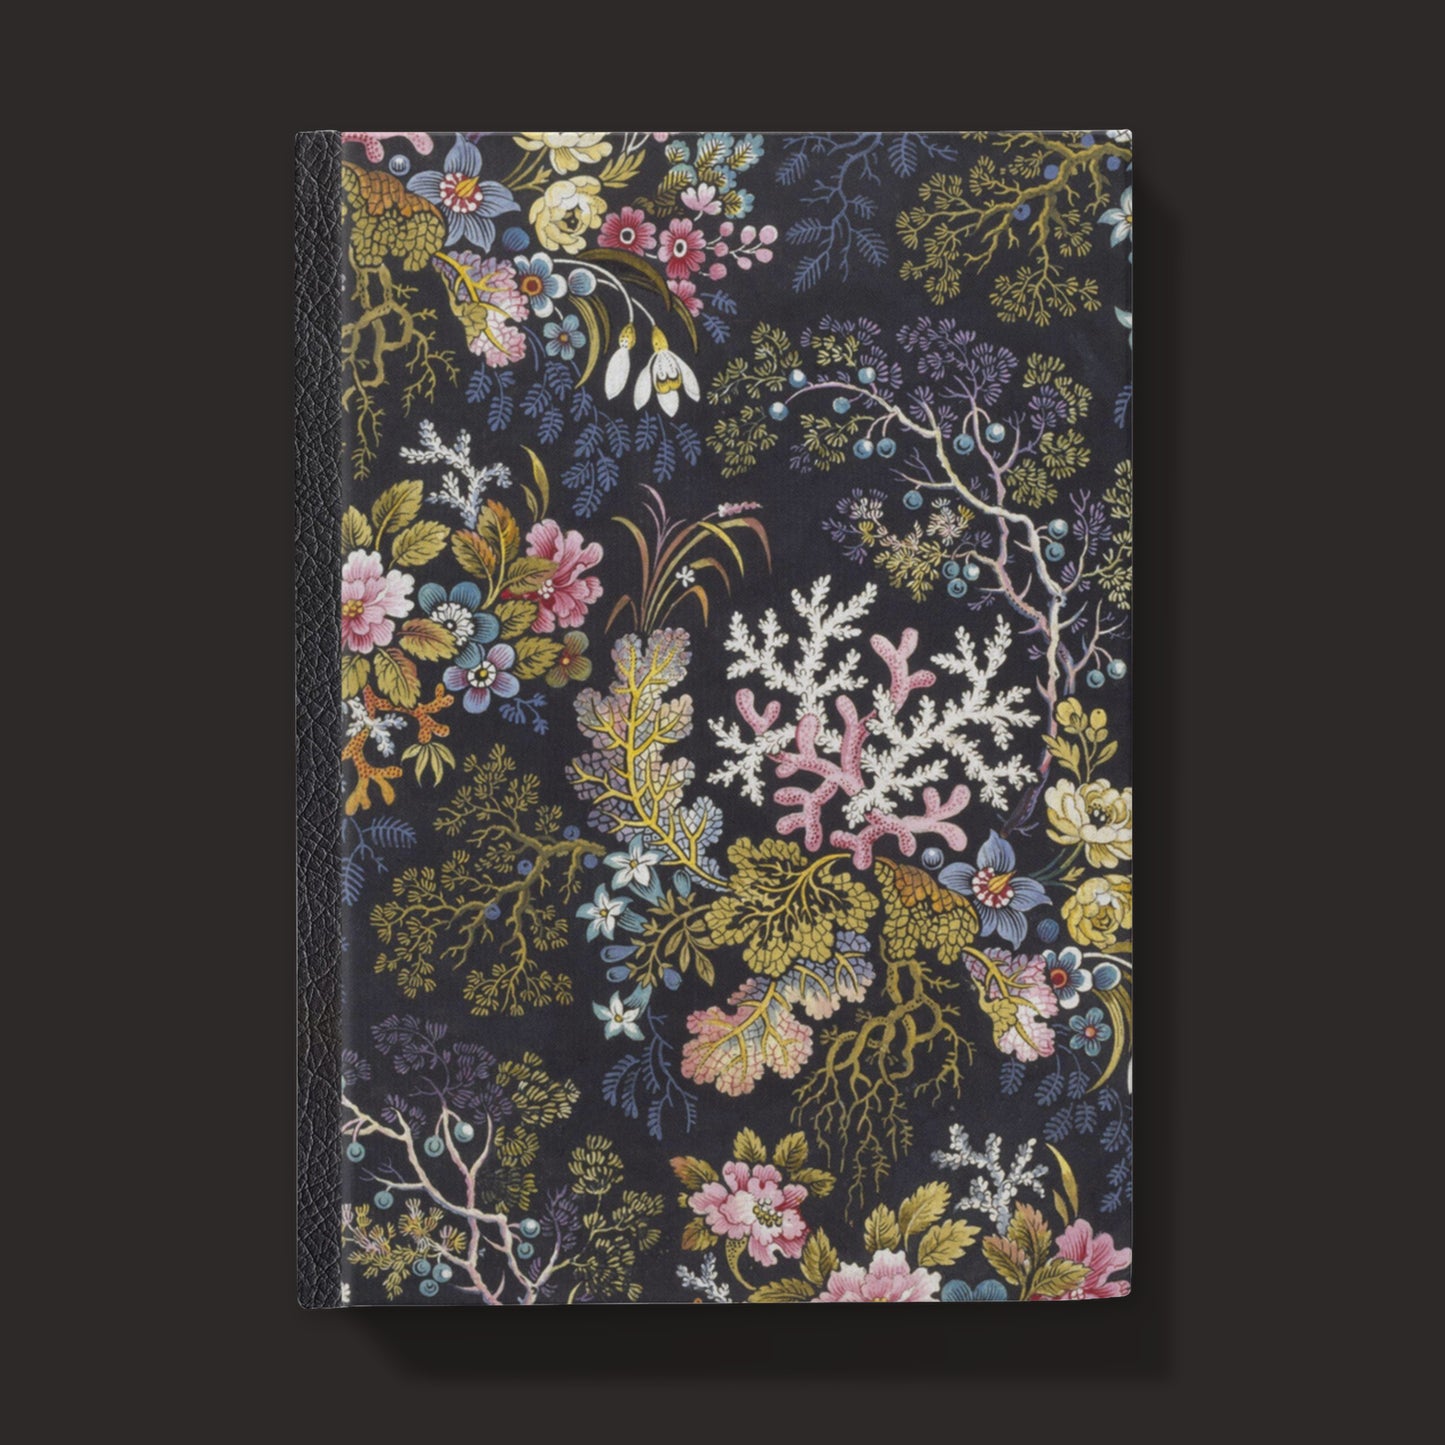 hardcover journal on black background dark vintage vibe floral cover with seaweed and coral design